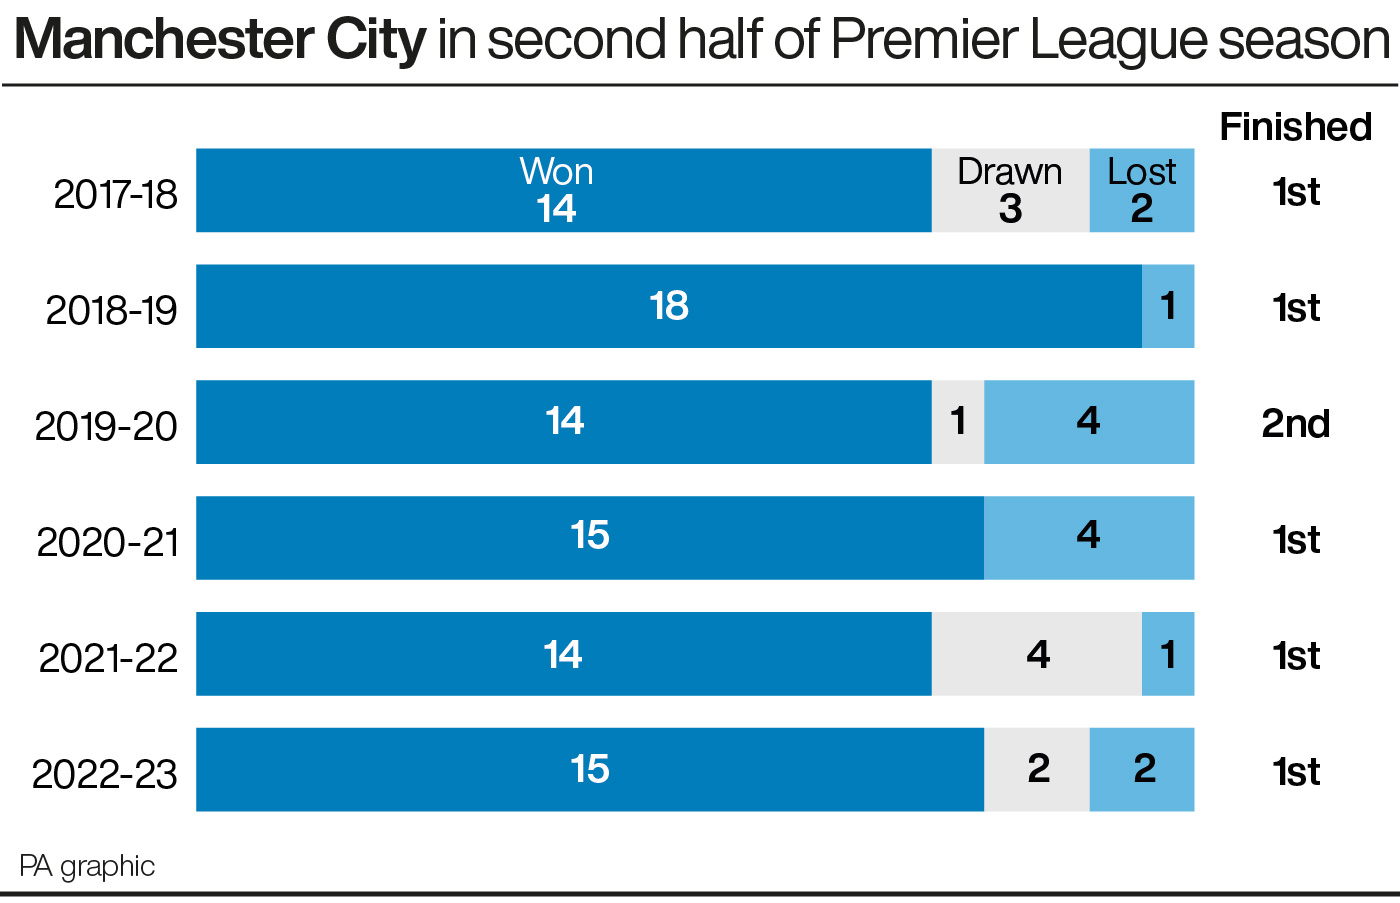 Manchester City's record in the second half of the Premier League season since 2017-18 (graphic)